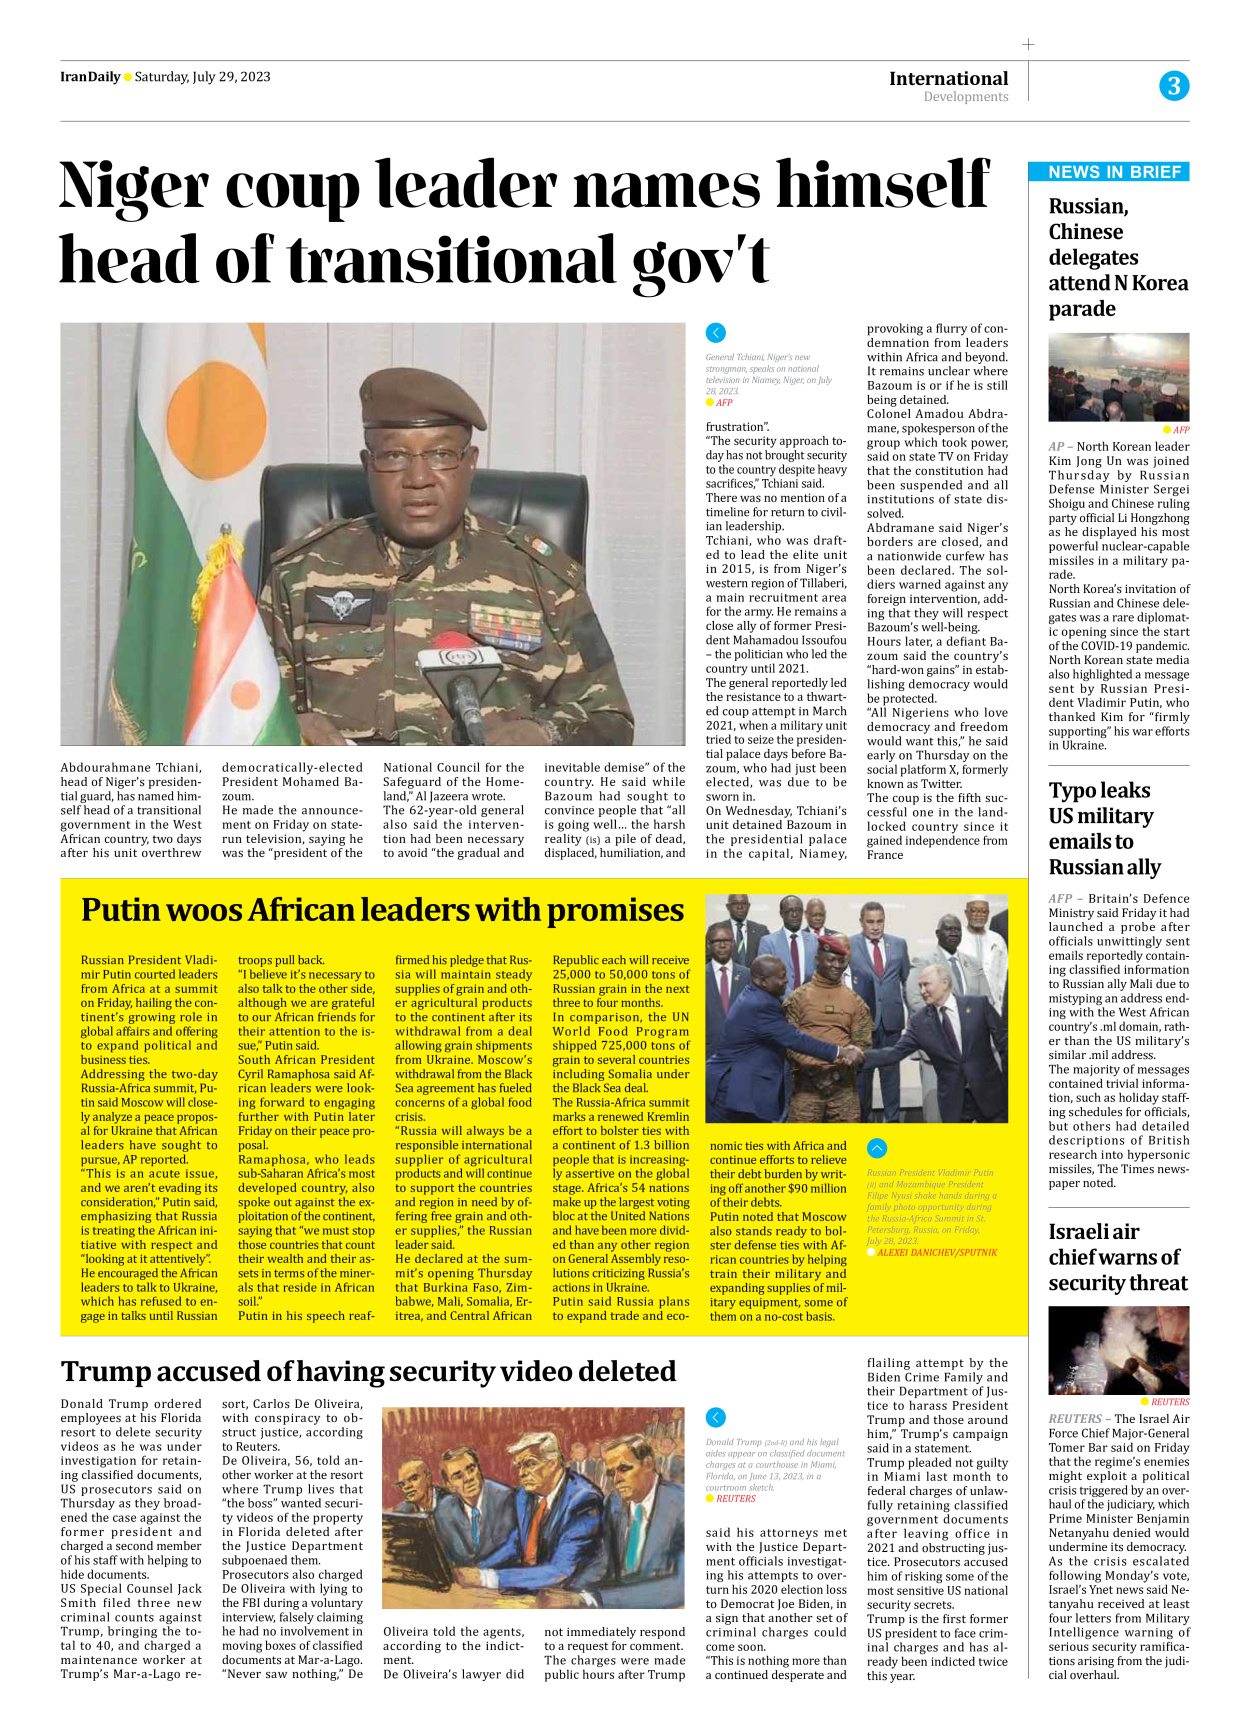 Iran Daily - Number Seven Thousand Three Hundred and Fifty - 29 July 2023 - Page 3